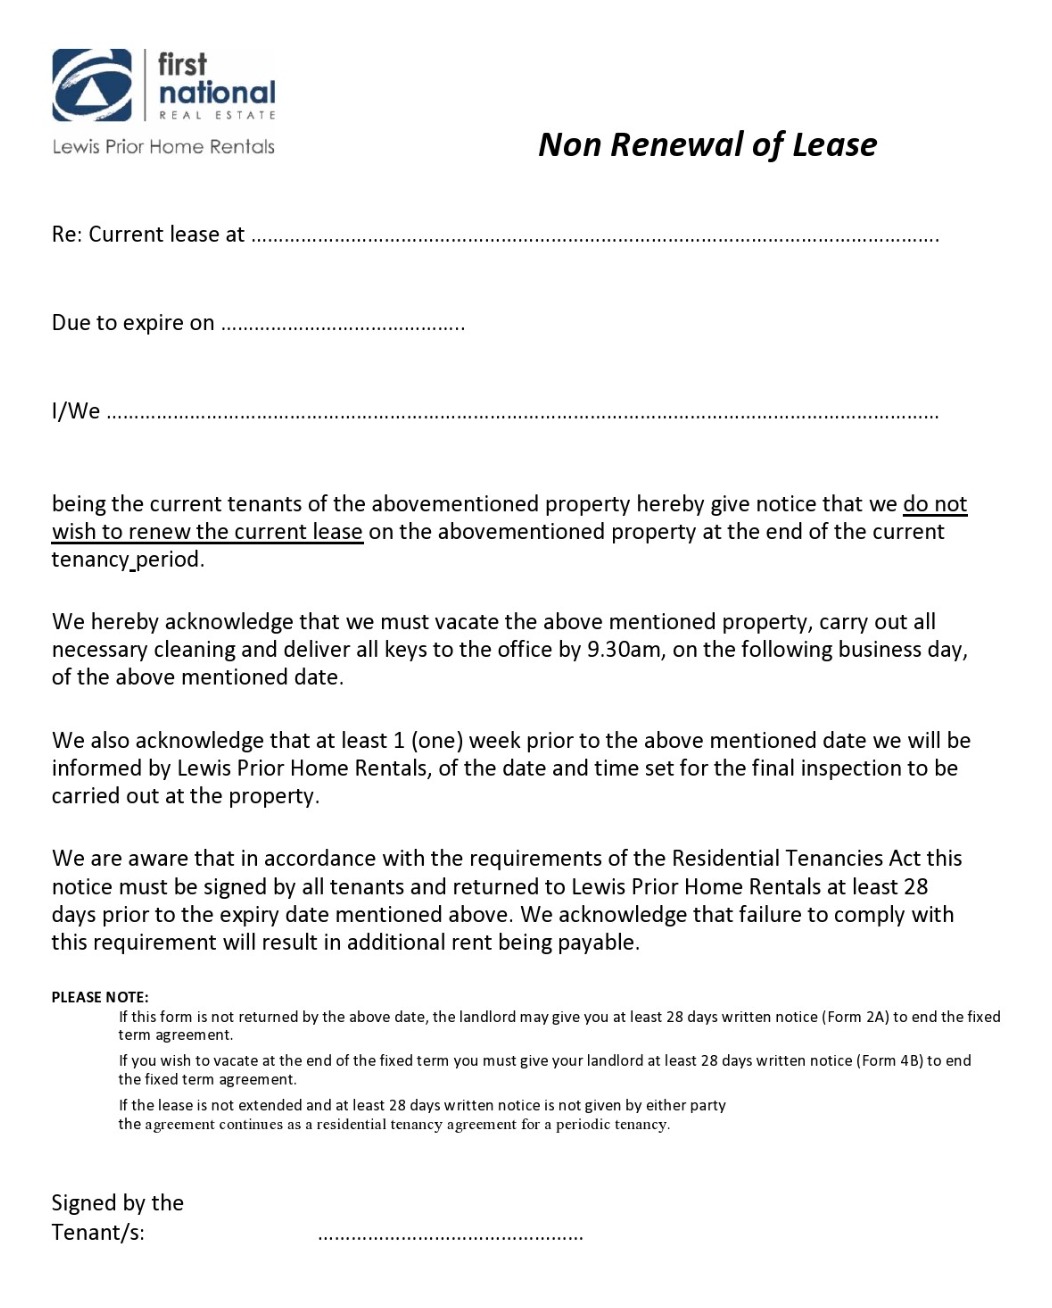 non renewal of lease letter sample